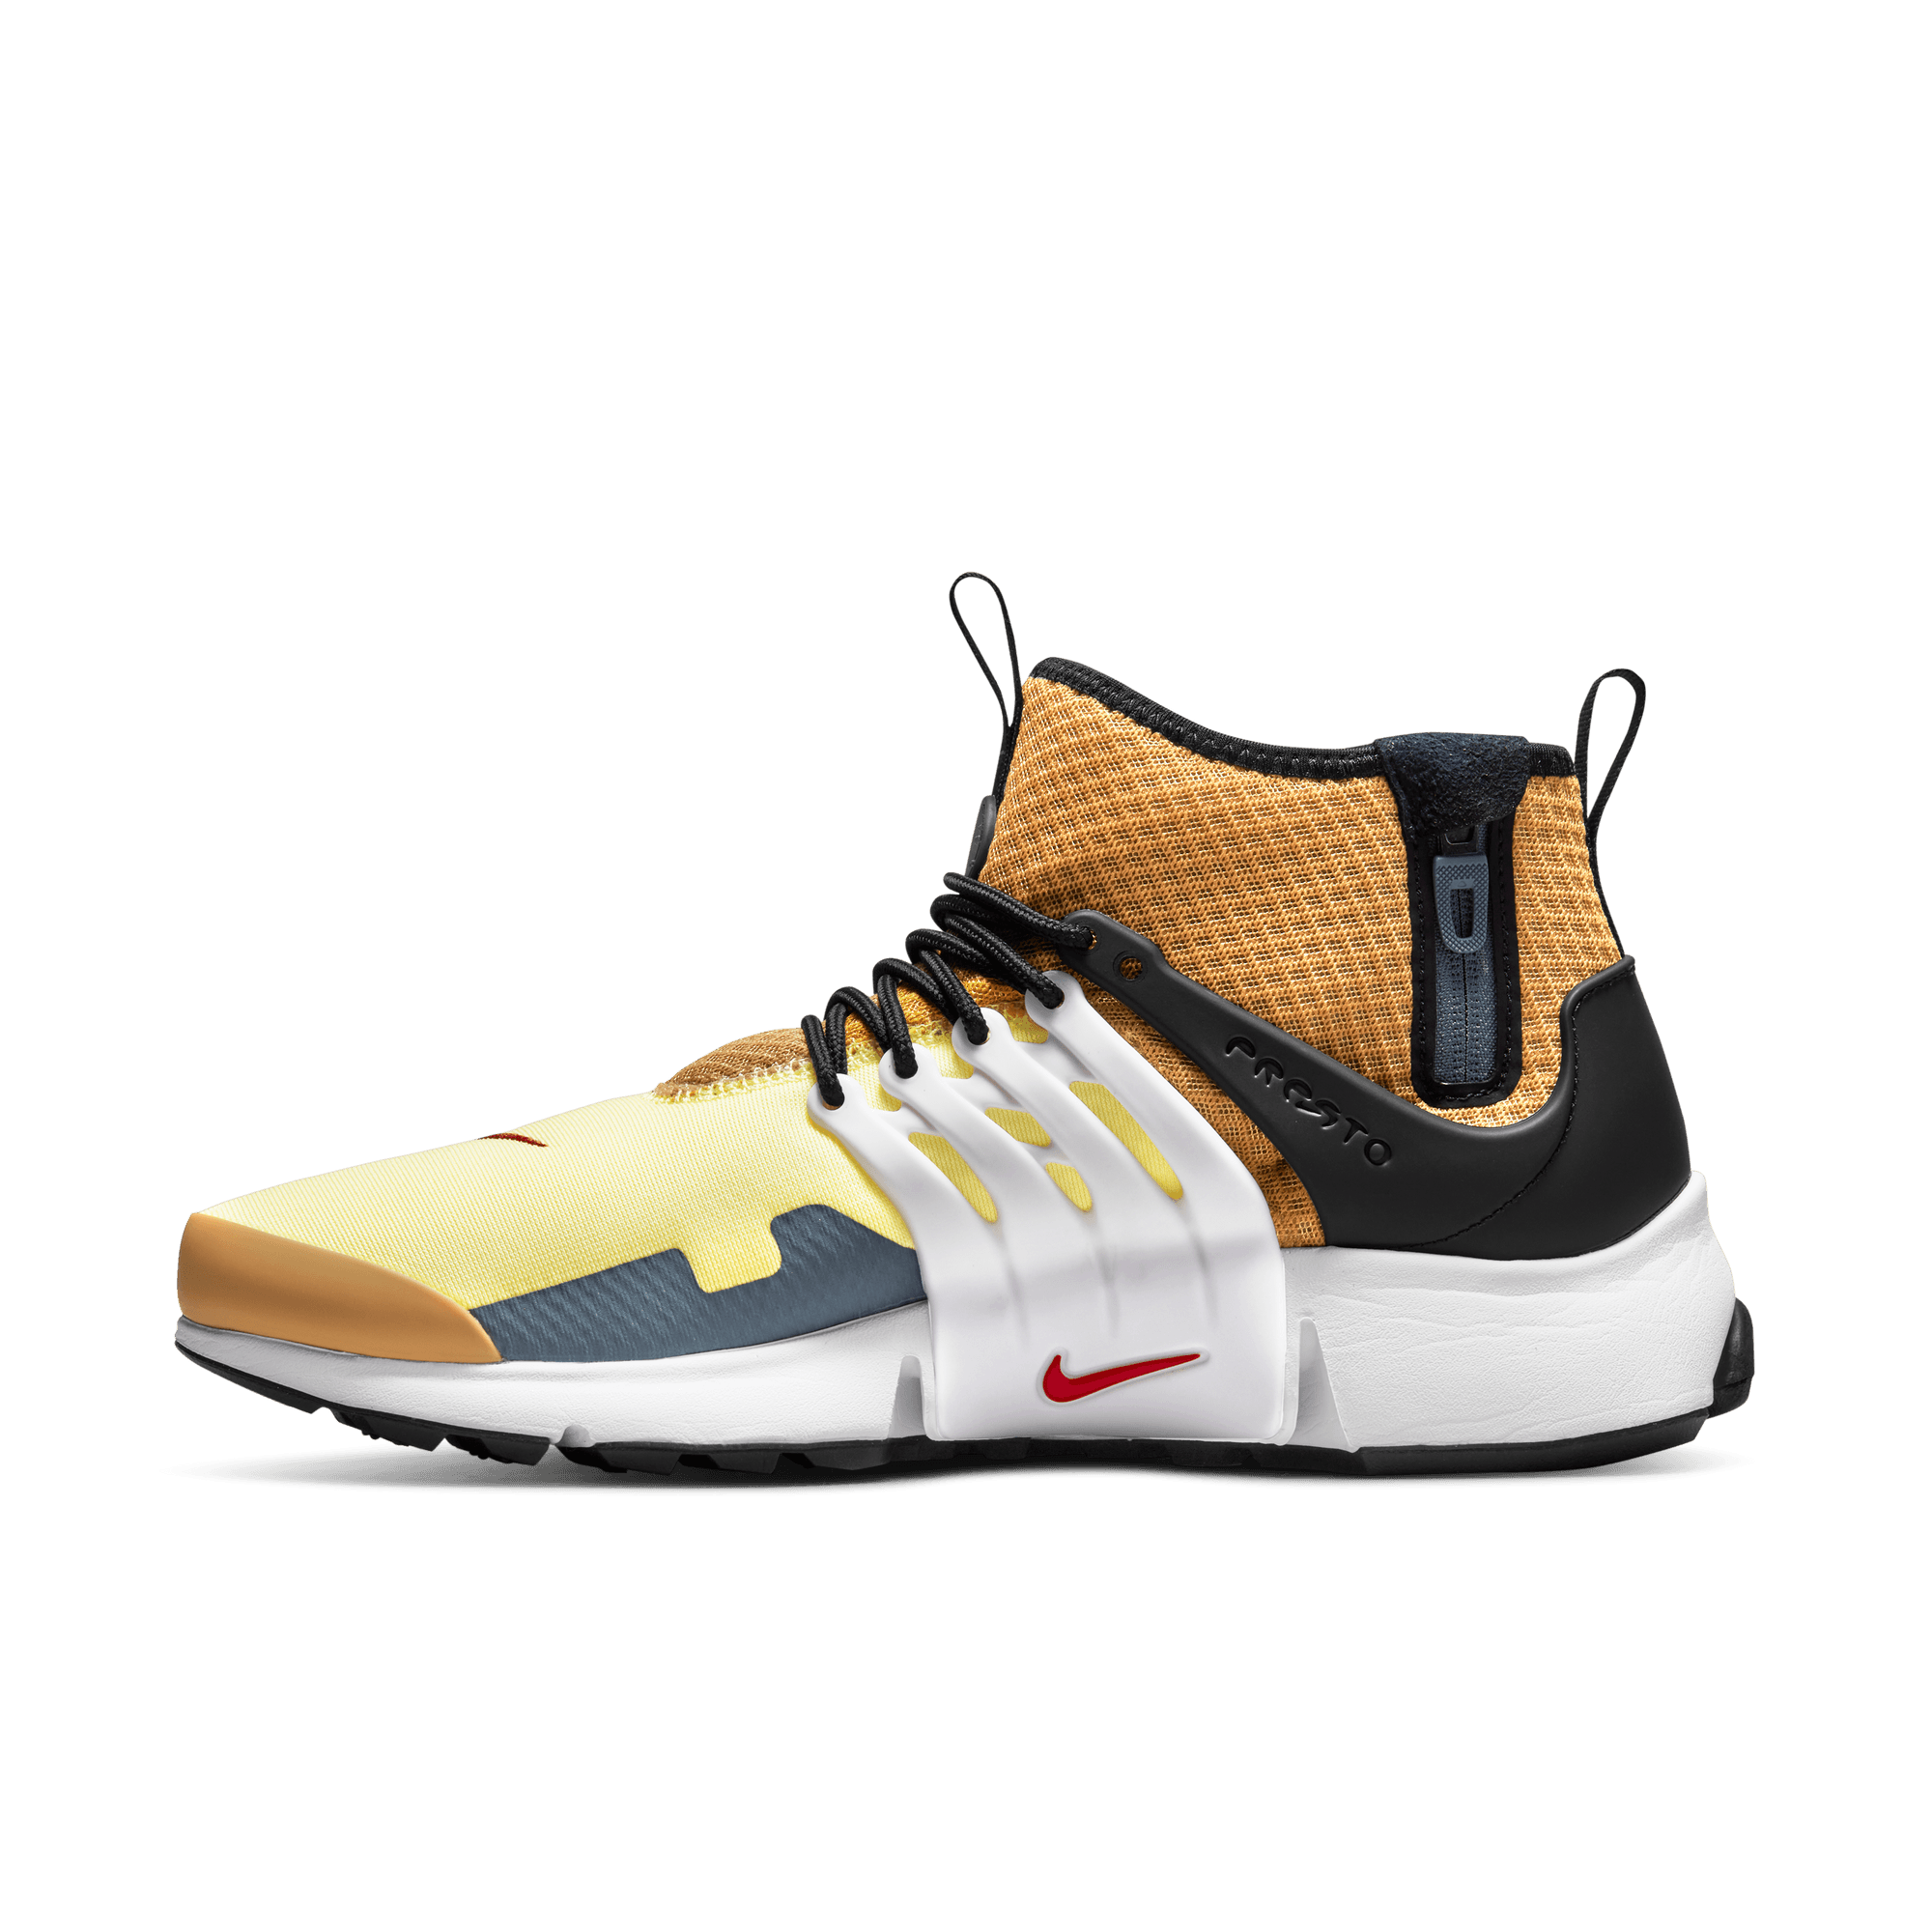 Intacto once calcular Nike Air Presto Mid Utility - Men's - GBNY